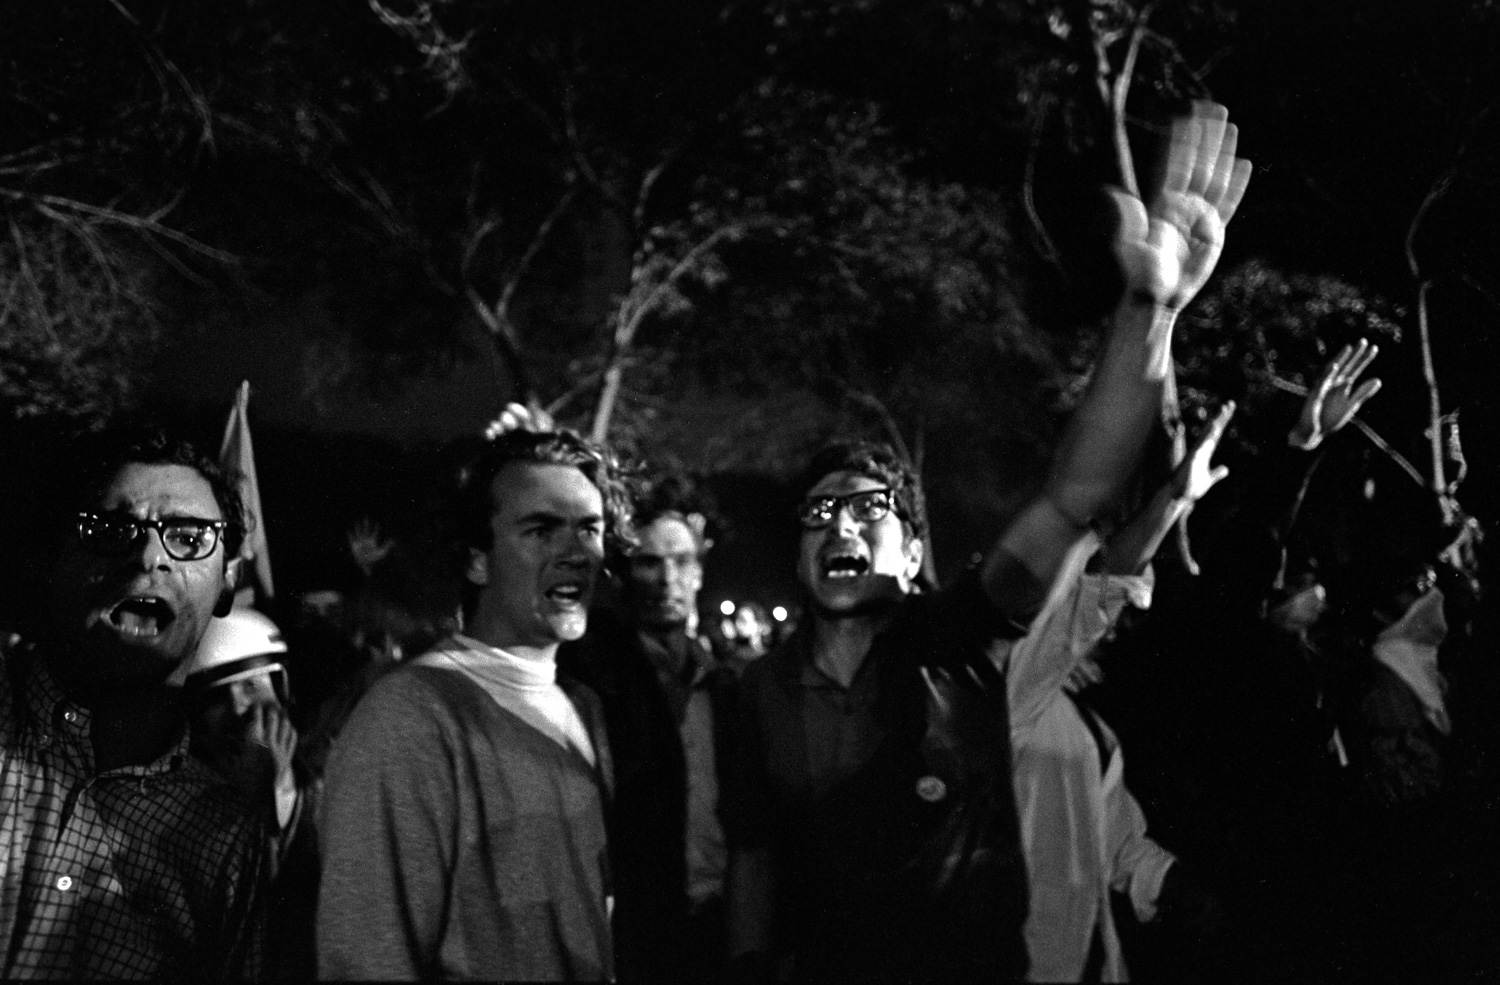  "Sieg, Heil!" is what we chanted outside the Hilton Hotel on Michigan Avenue that night after Chicago police charged the crowd, pushing them through the hotel's plate glass window. 